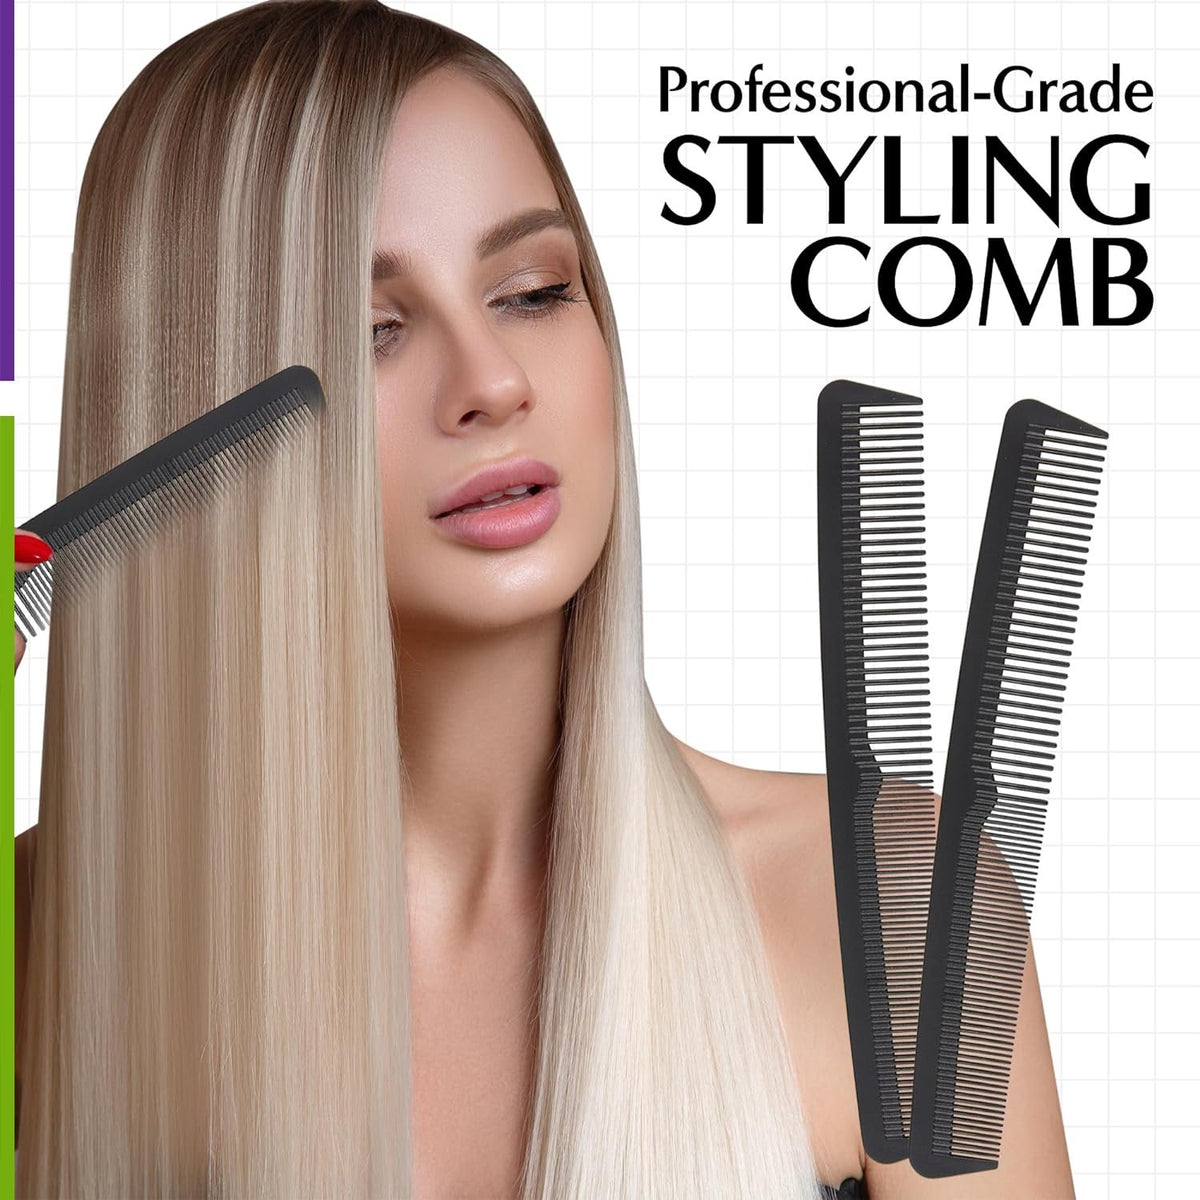 Professional Grade Styling Comb Set - 2 Pack Premium Carbon Fiber 7" Comb - Heat Resistant, Fine and Wide Tooth, Anti Static - Salon Quality Hair Styling Accessories for Home or Barber